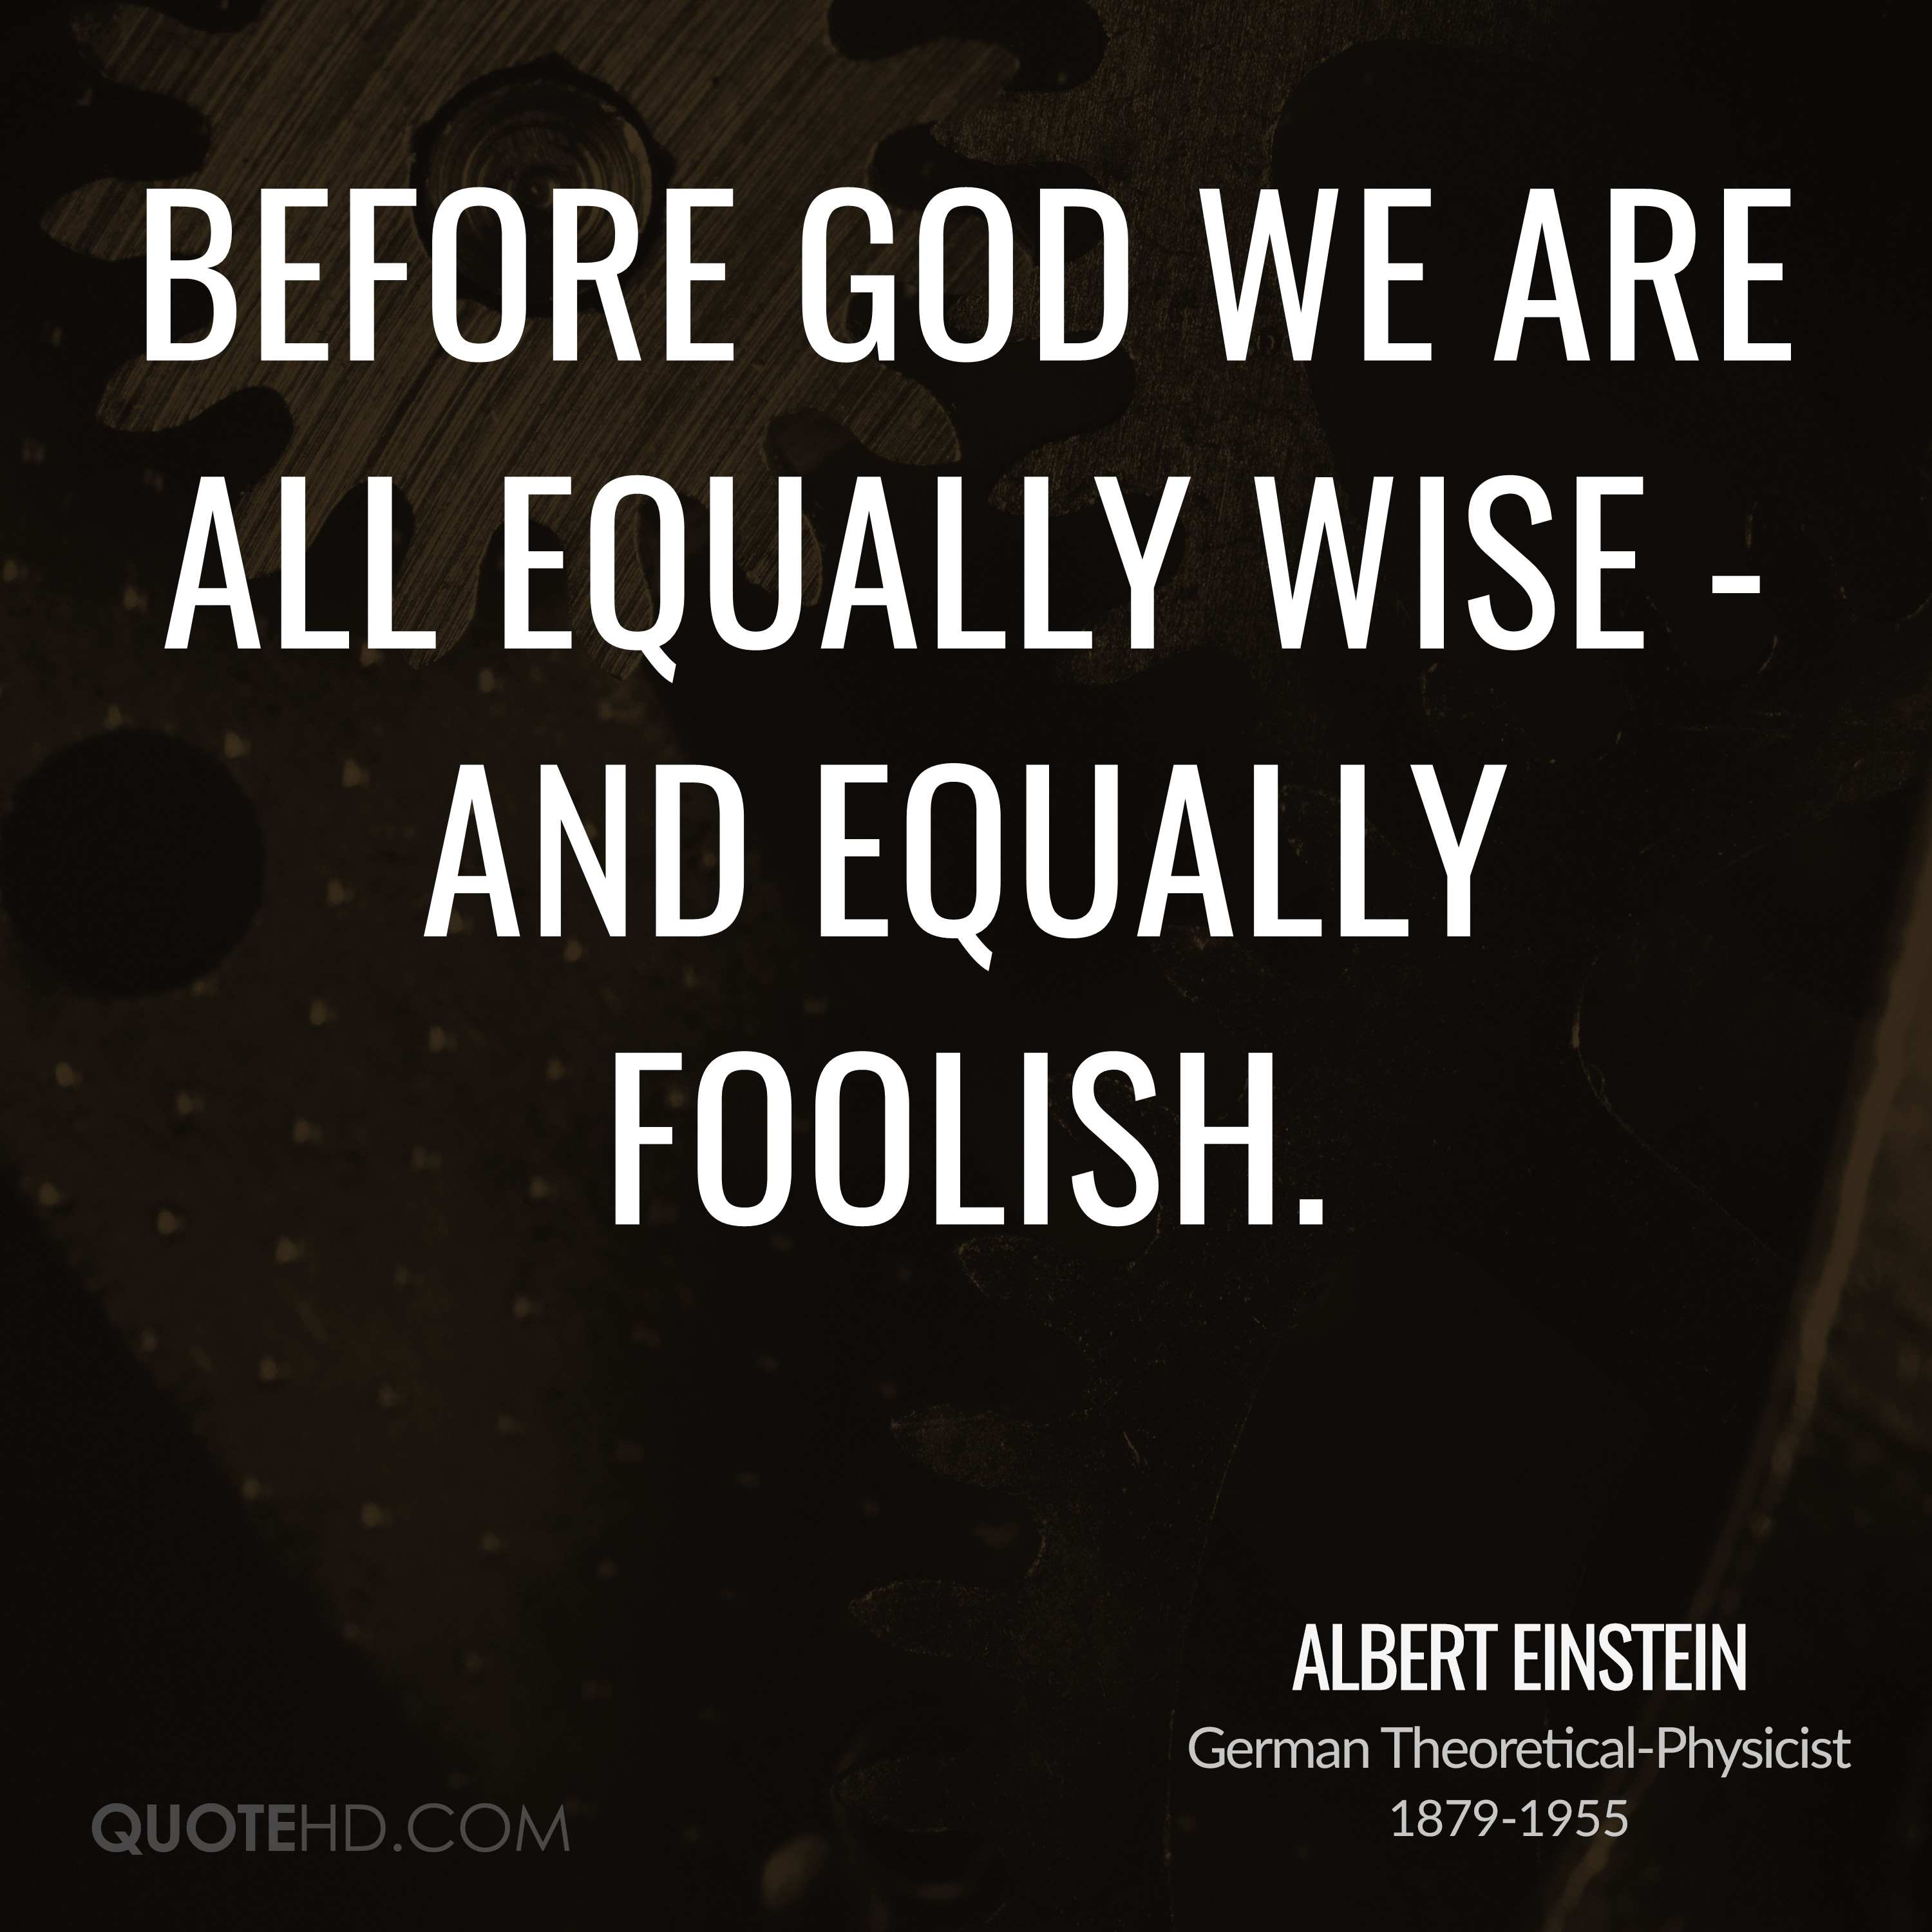 Before God we are all equally wise – and equally foolish. Albert Einstein